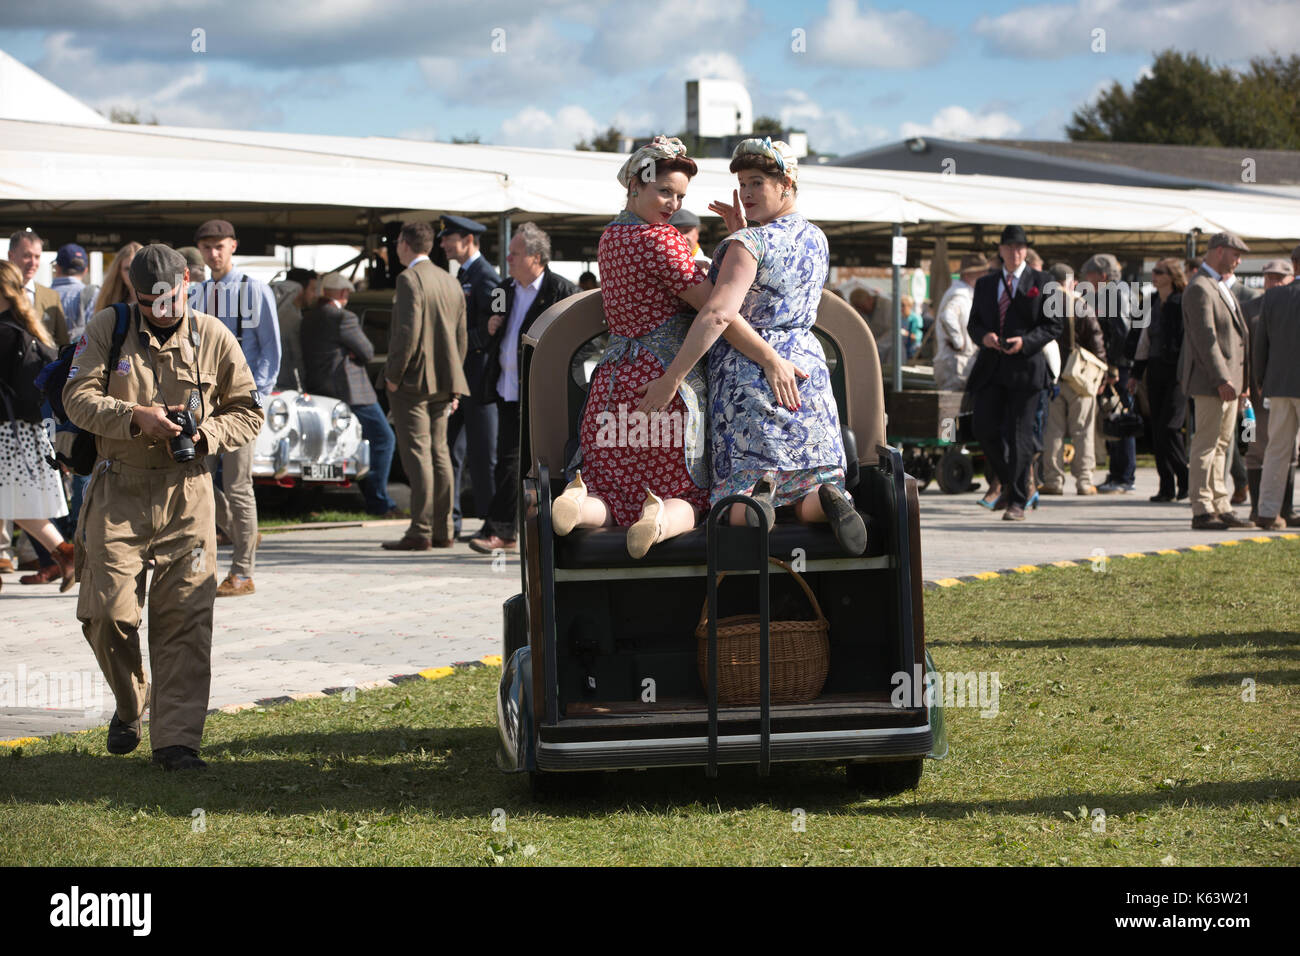 Vintage Cleaning girls at Goodwood Revival 2017 Meeting, Goodwood race track, organised by the British Automobile Racing Club, West Sussex, England UK Stock Photo